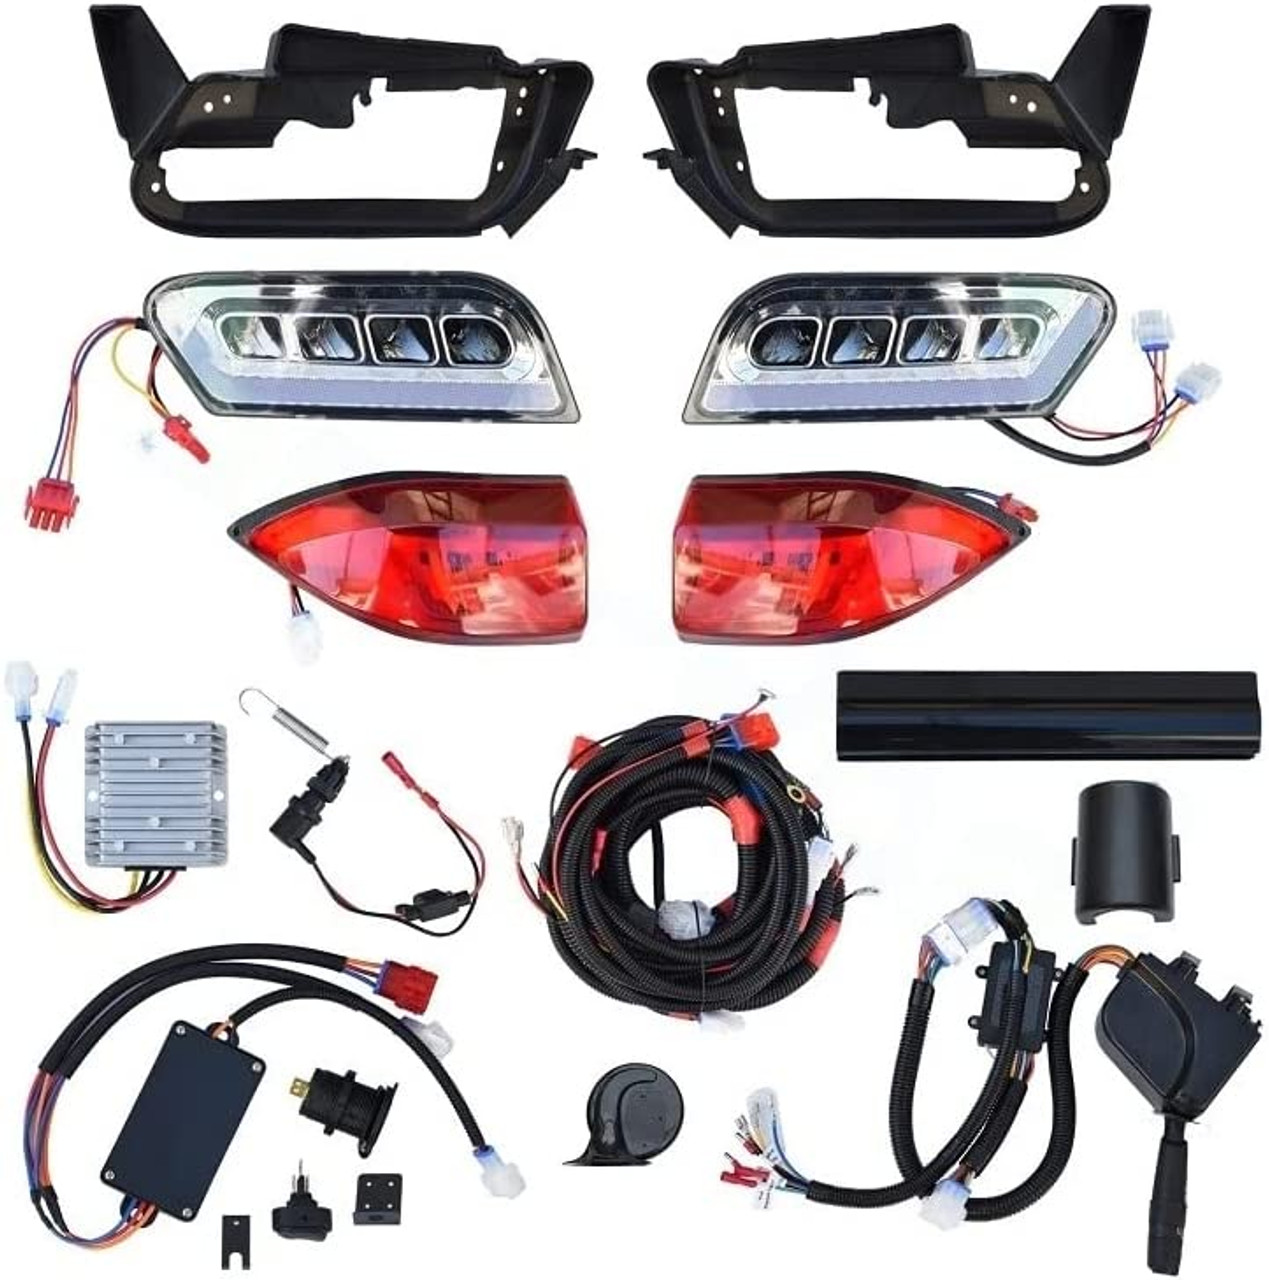 Deluxe LED Light Kit for Club Car Tempo Golf Carts with Complete LED Lighting and Signaling for Safe and Stylish Driving, LIGHT-101